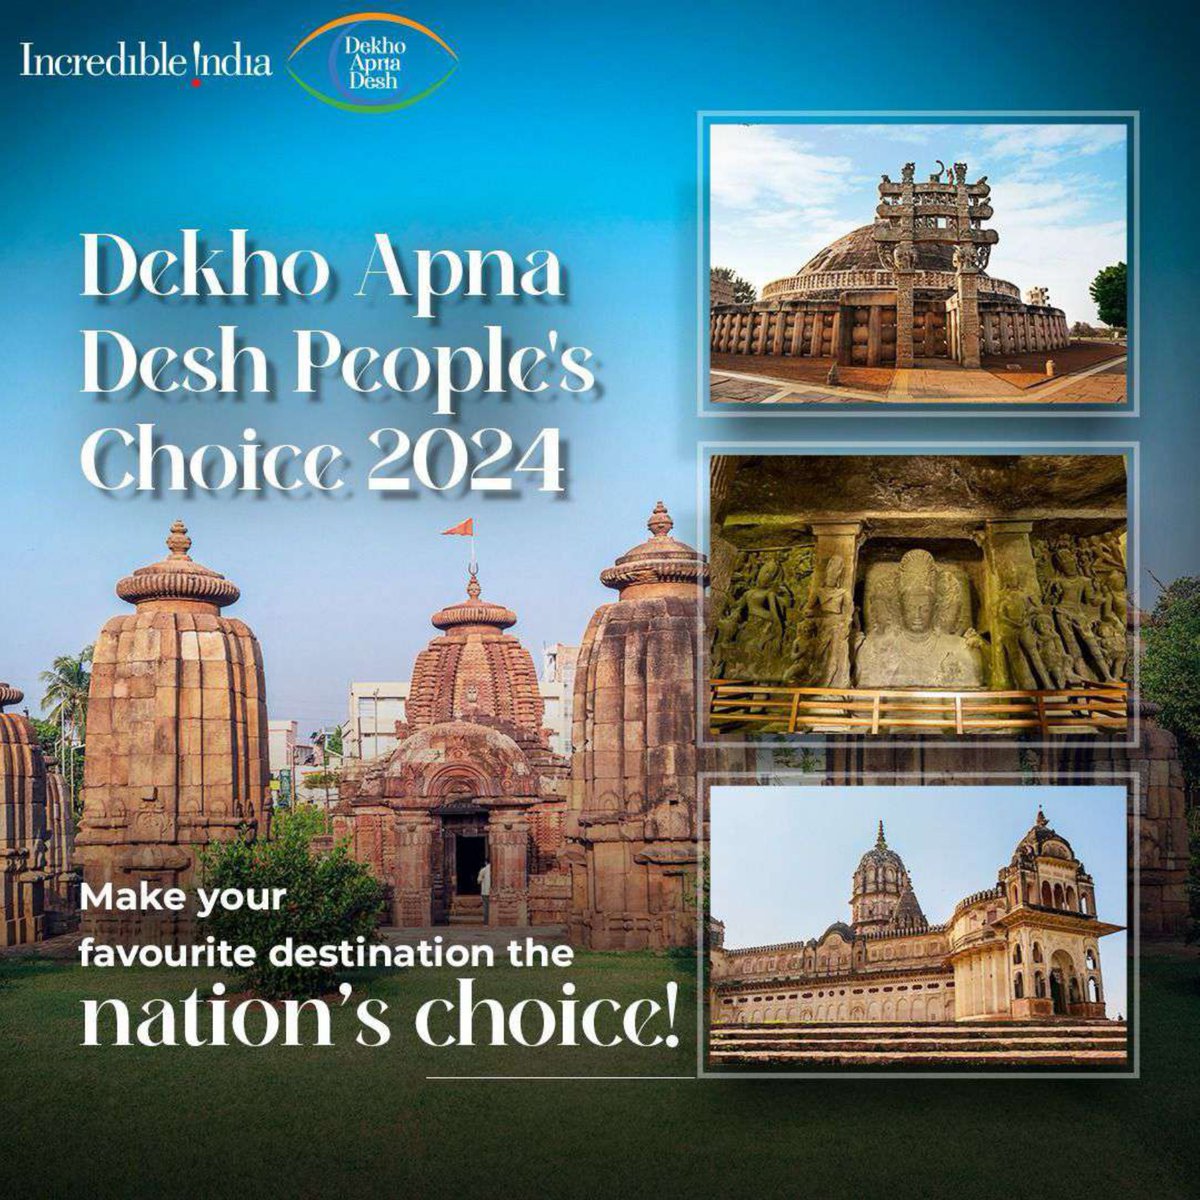 Join the movement, be heard loud and clear, cast your vote for DekhoApnaDesh, the people's choice of the year!' 🌟 #DekhoApnaDesh #PeoplesChoice2024 #incridibleindia #indiatourism @incredibleindia @tourismgoi